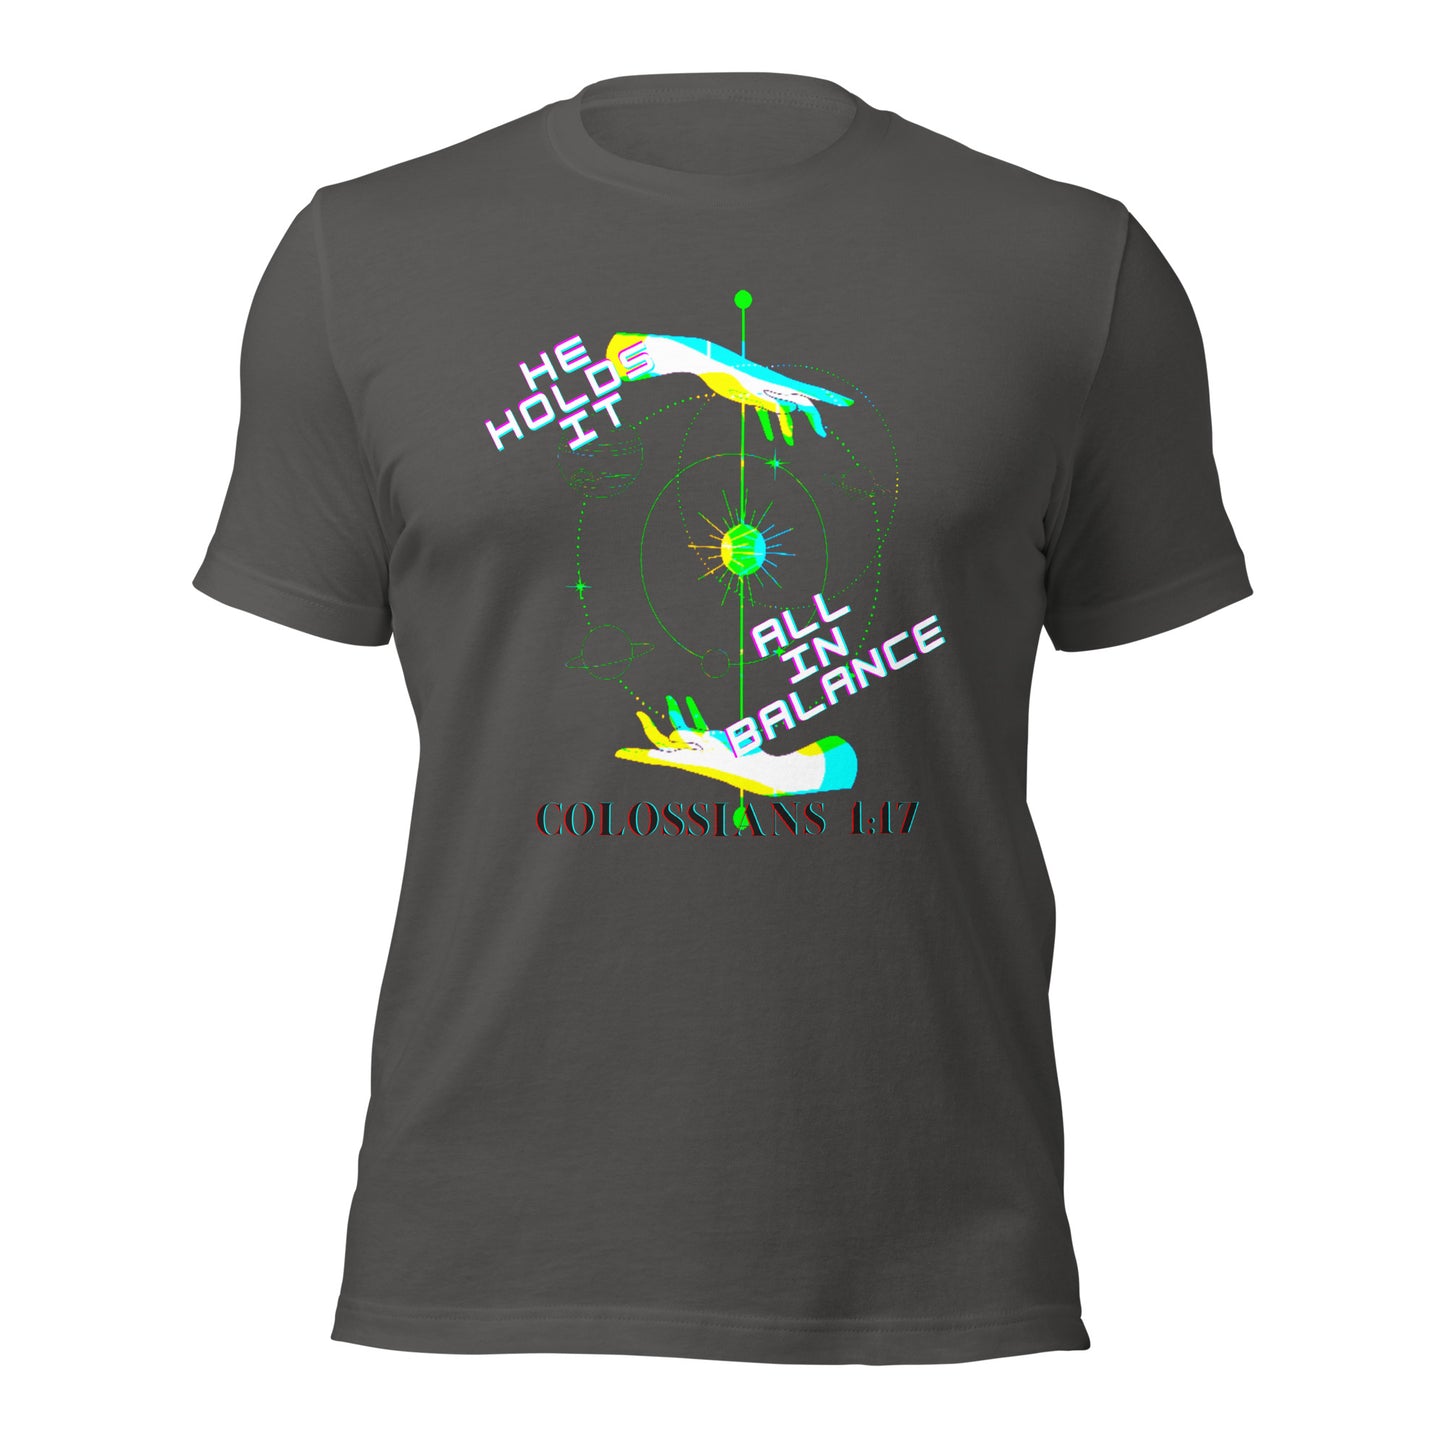 He Holds It All in Balance - Colossians 1:17 - Women's Tee